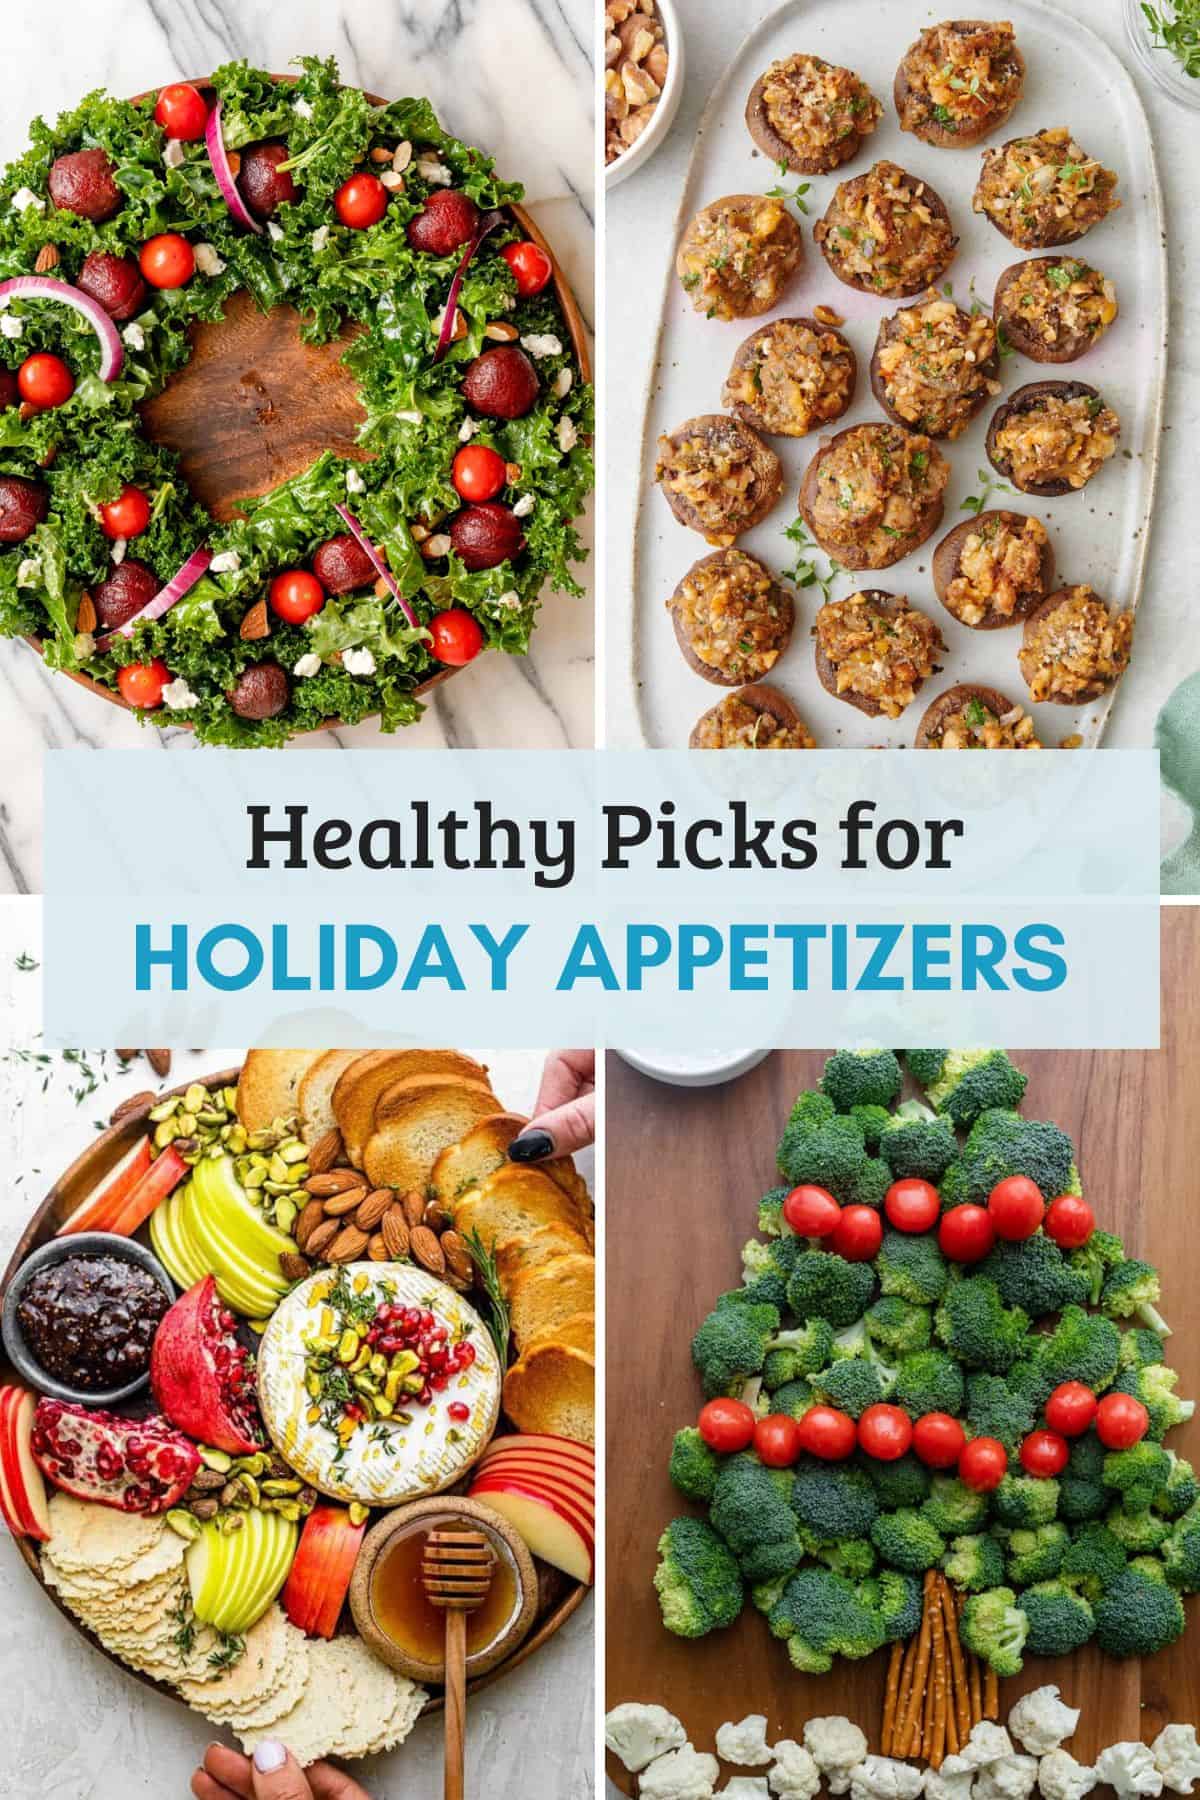 Round up image for healthy holiday appetizers.